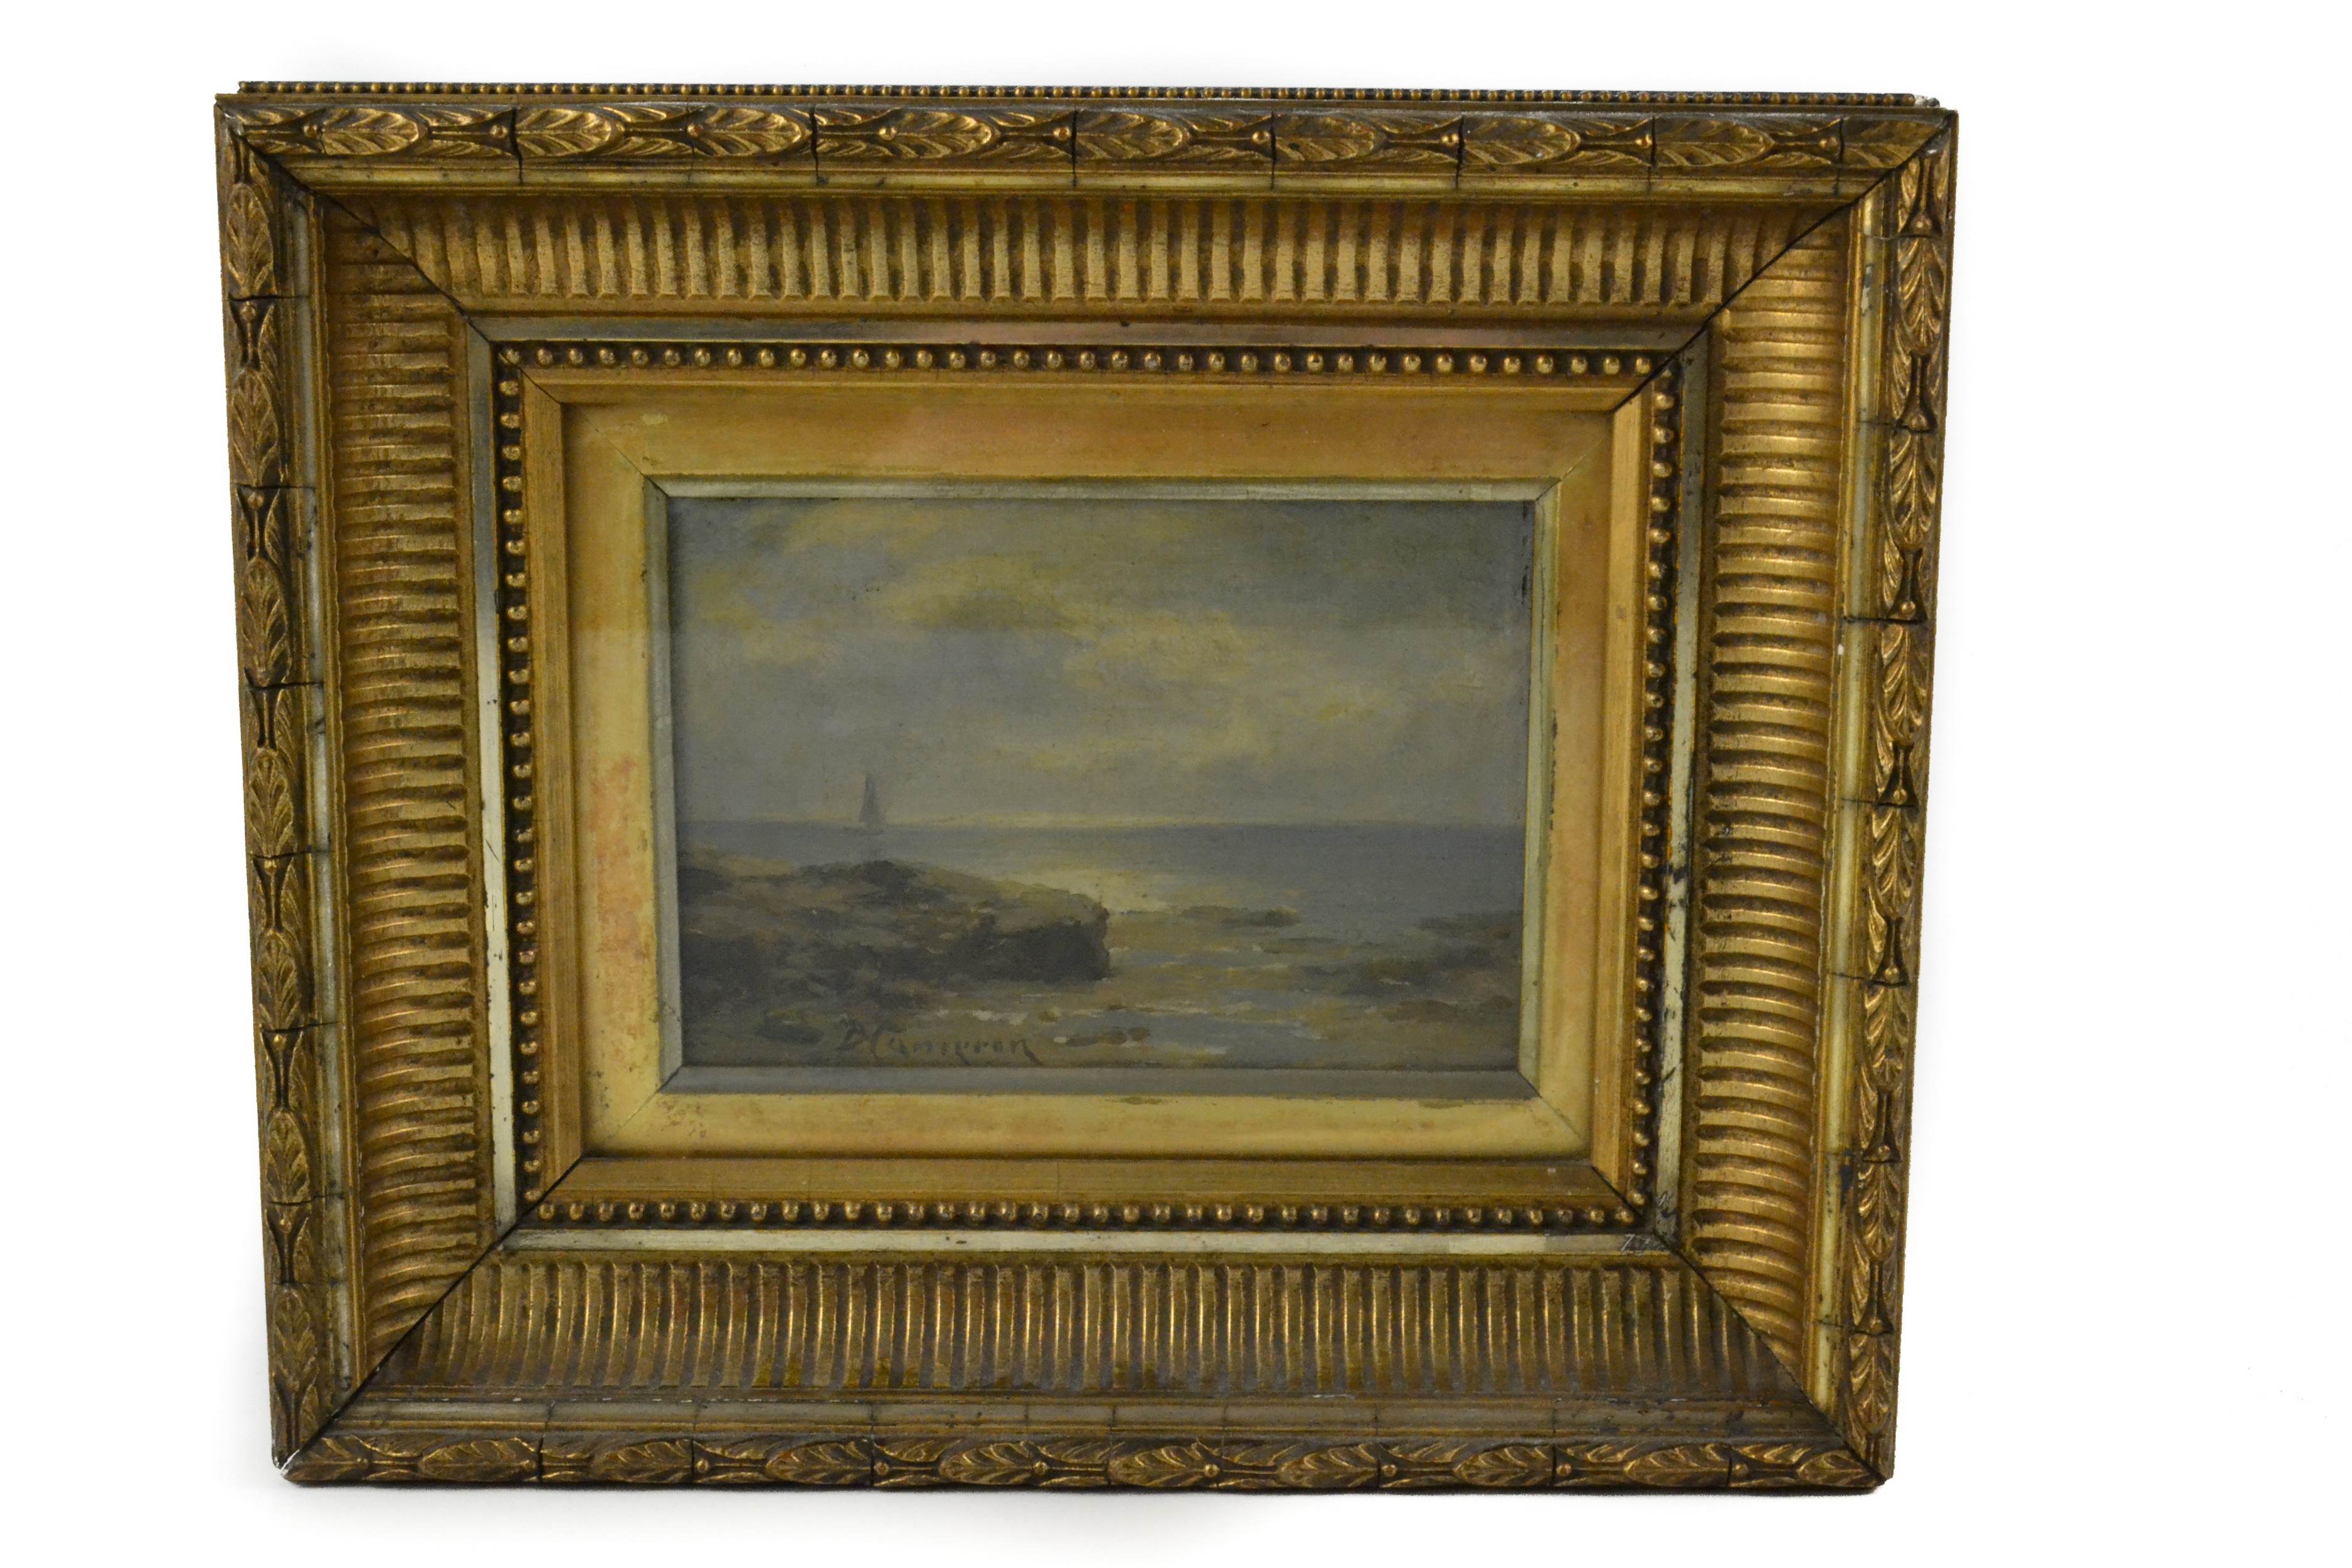 Sir David Young Cameron RA, Scottish Seascape, oil on board, signed, (10.5 x 15cm approx)